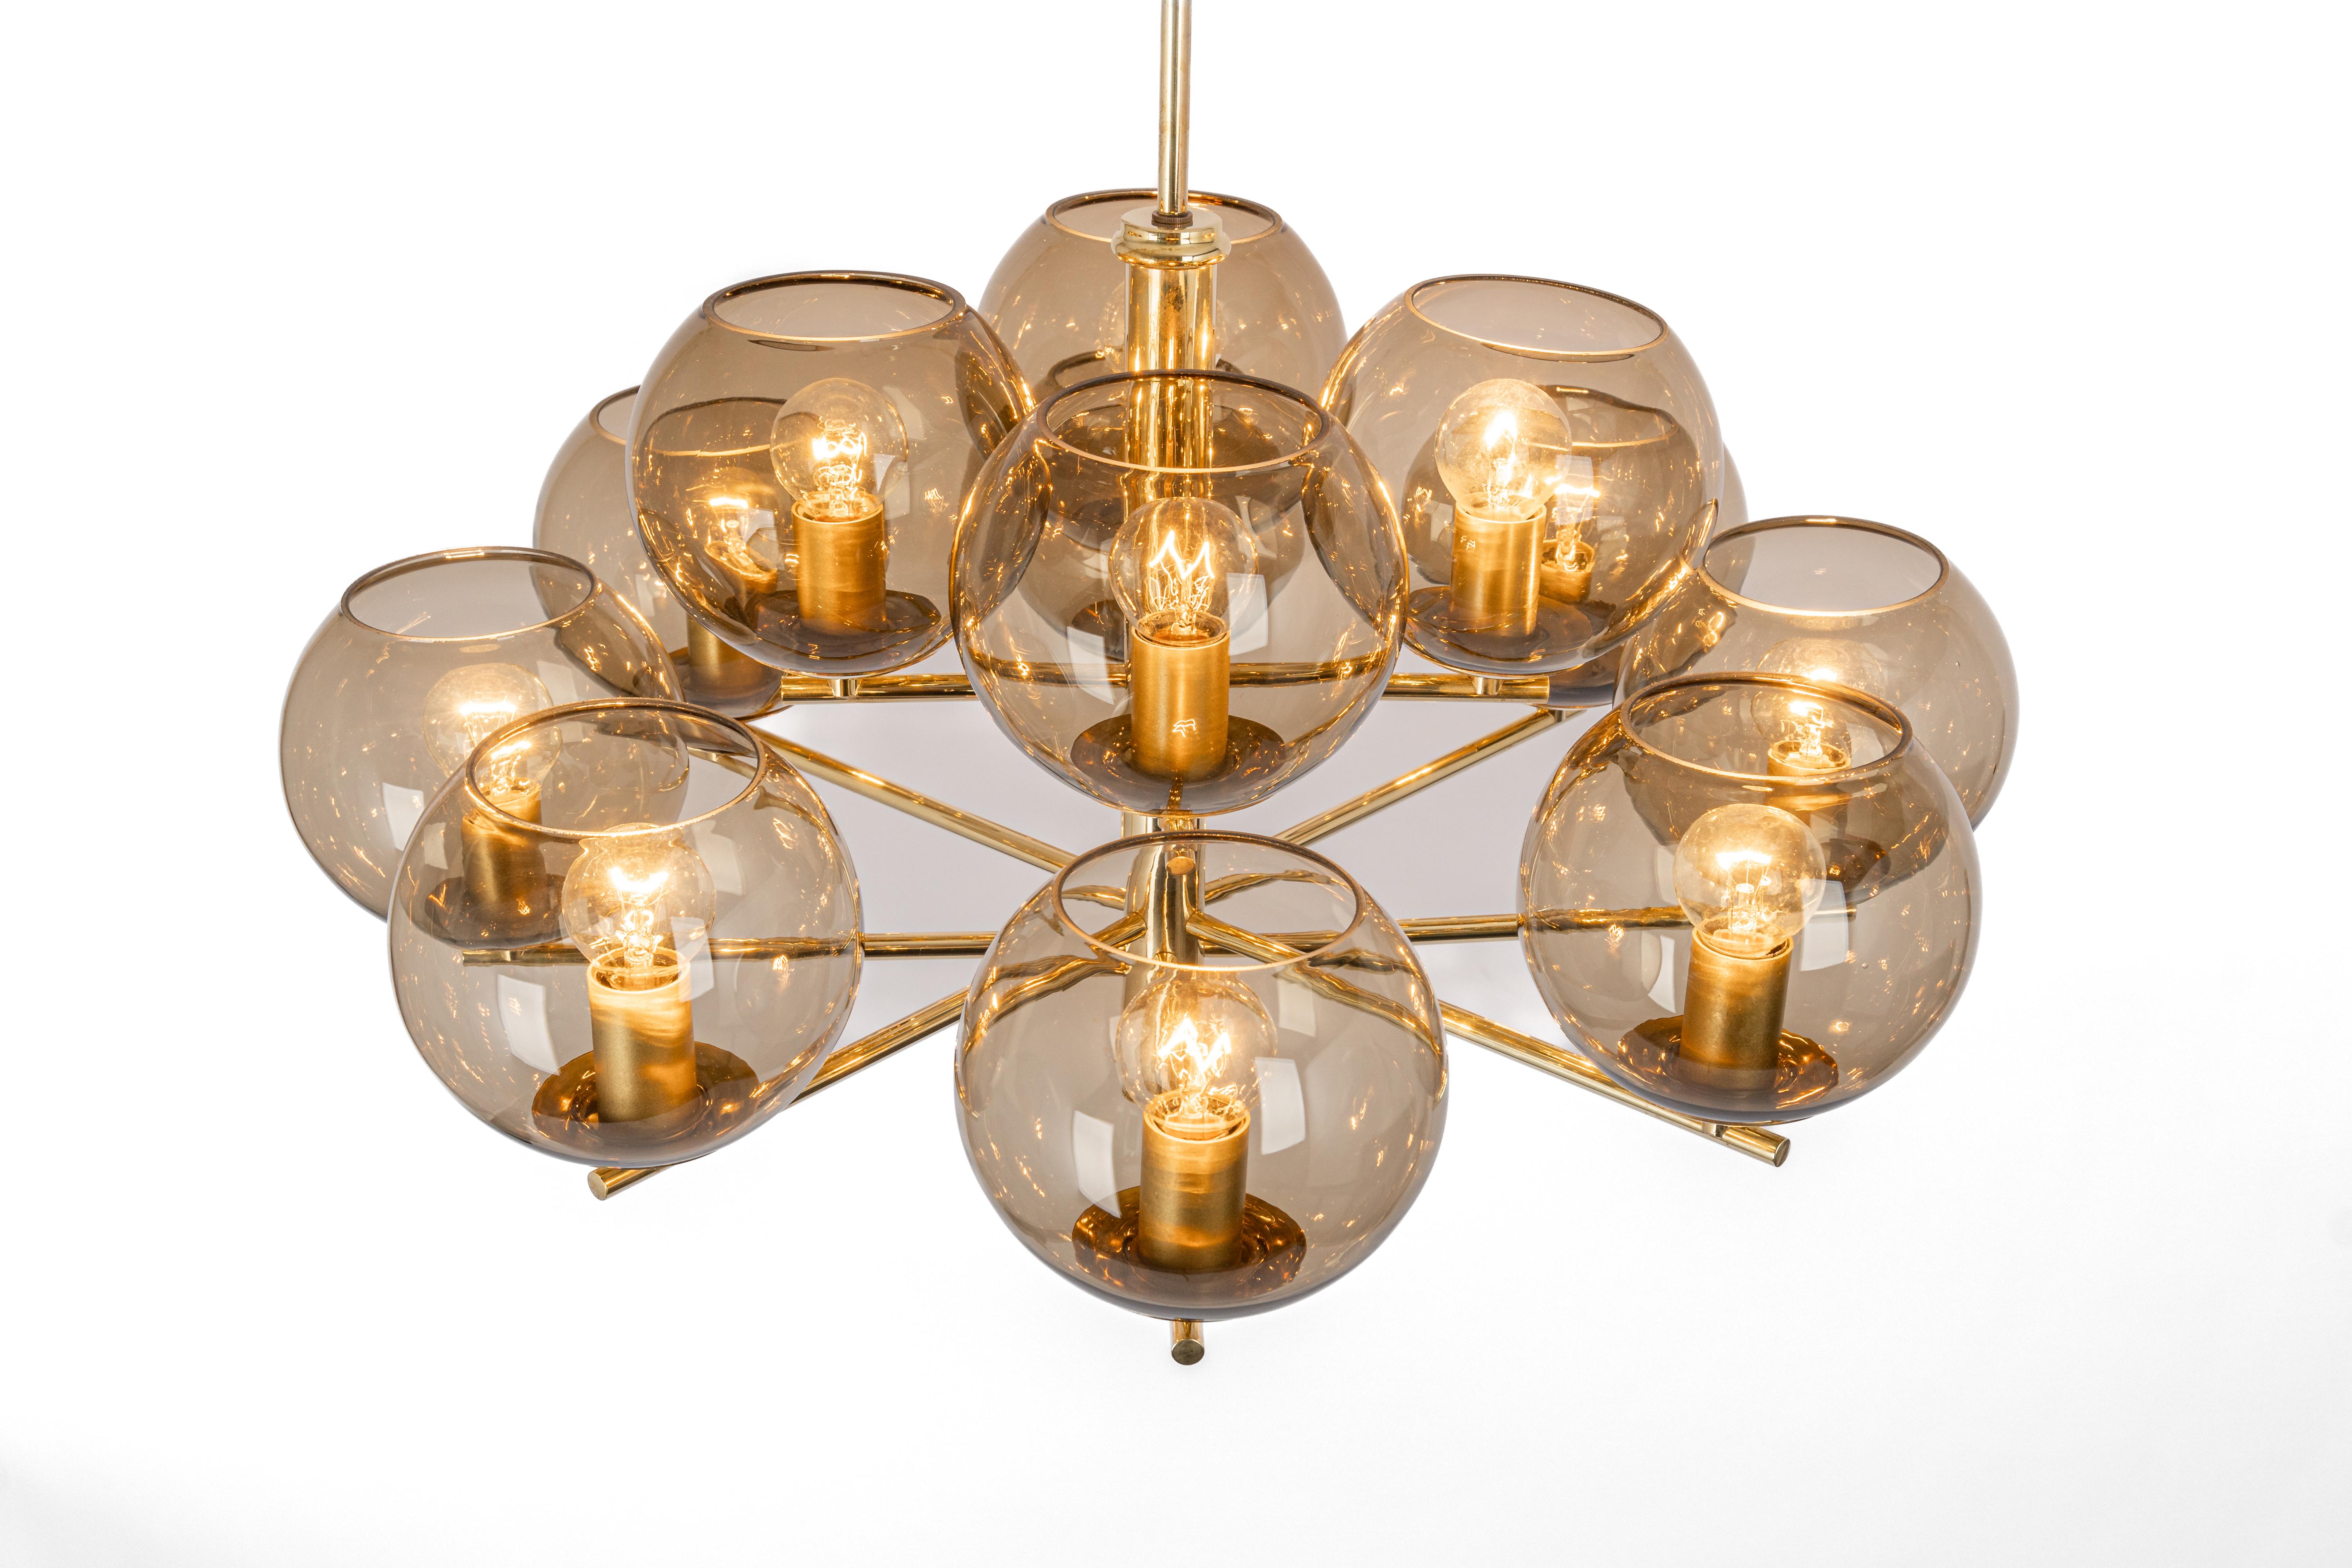 Large Stunning Big Sciolari Style Brass Chandelier, Germany, 1960s For Sale 4